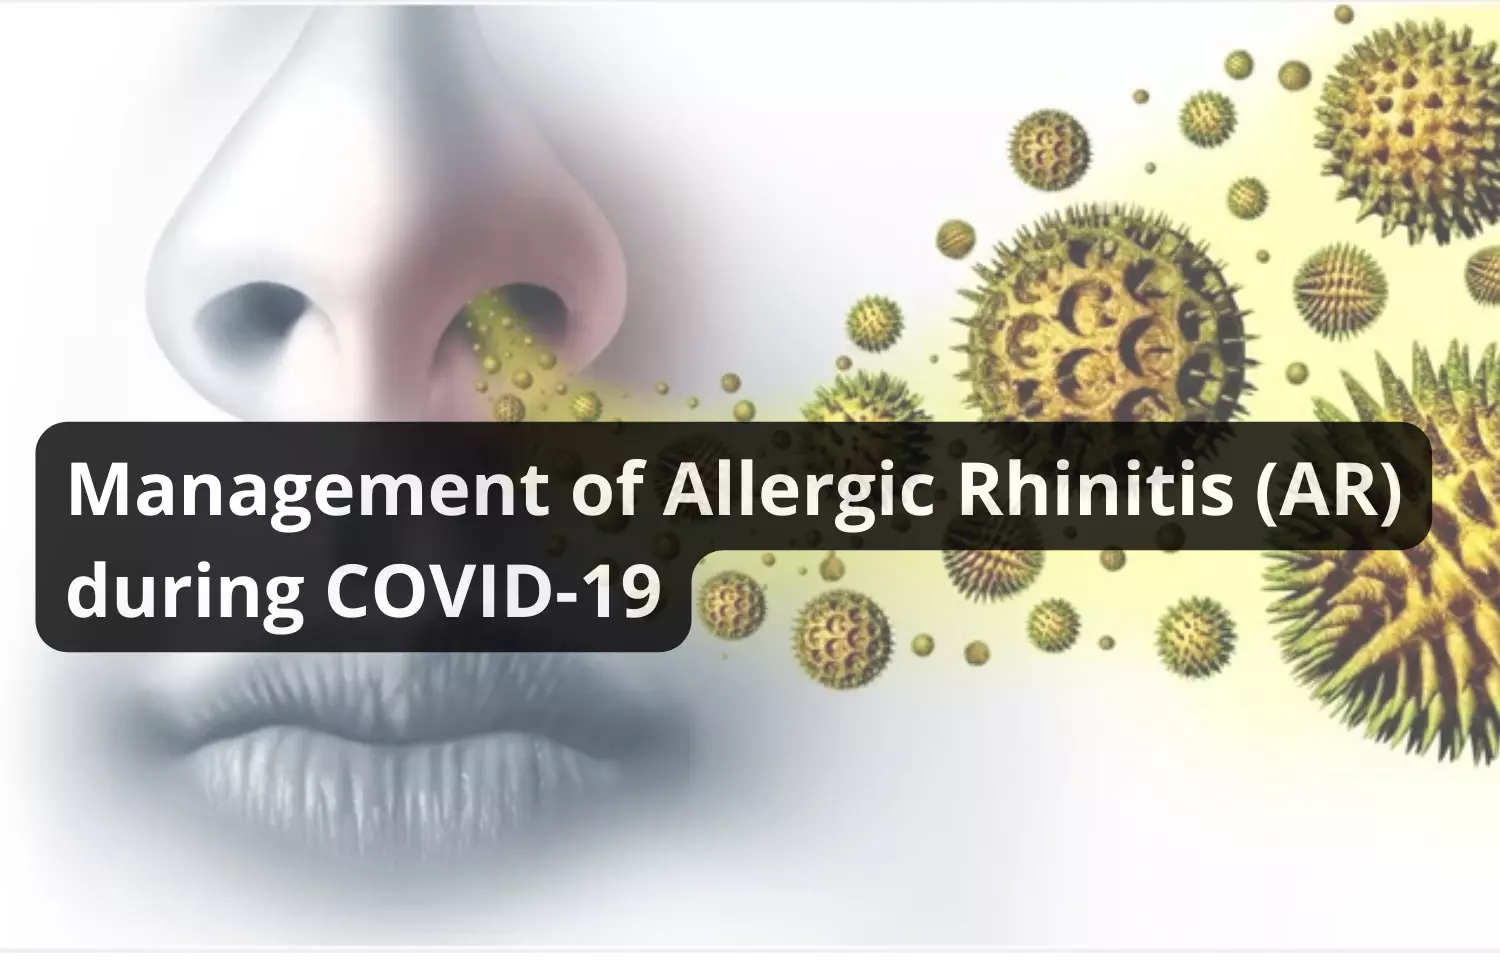 Management of Allergic Rhinitis during COVID-19 Pandemic